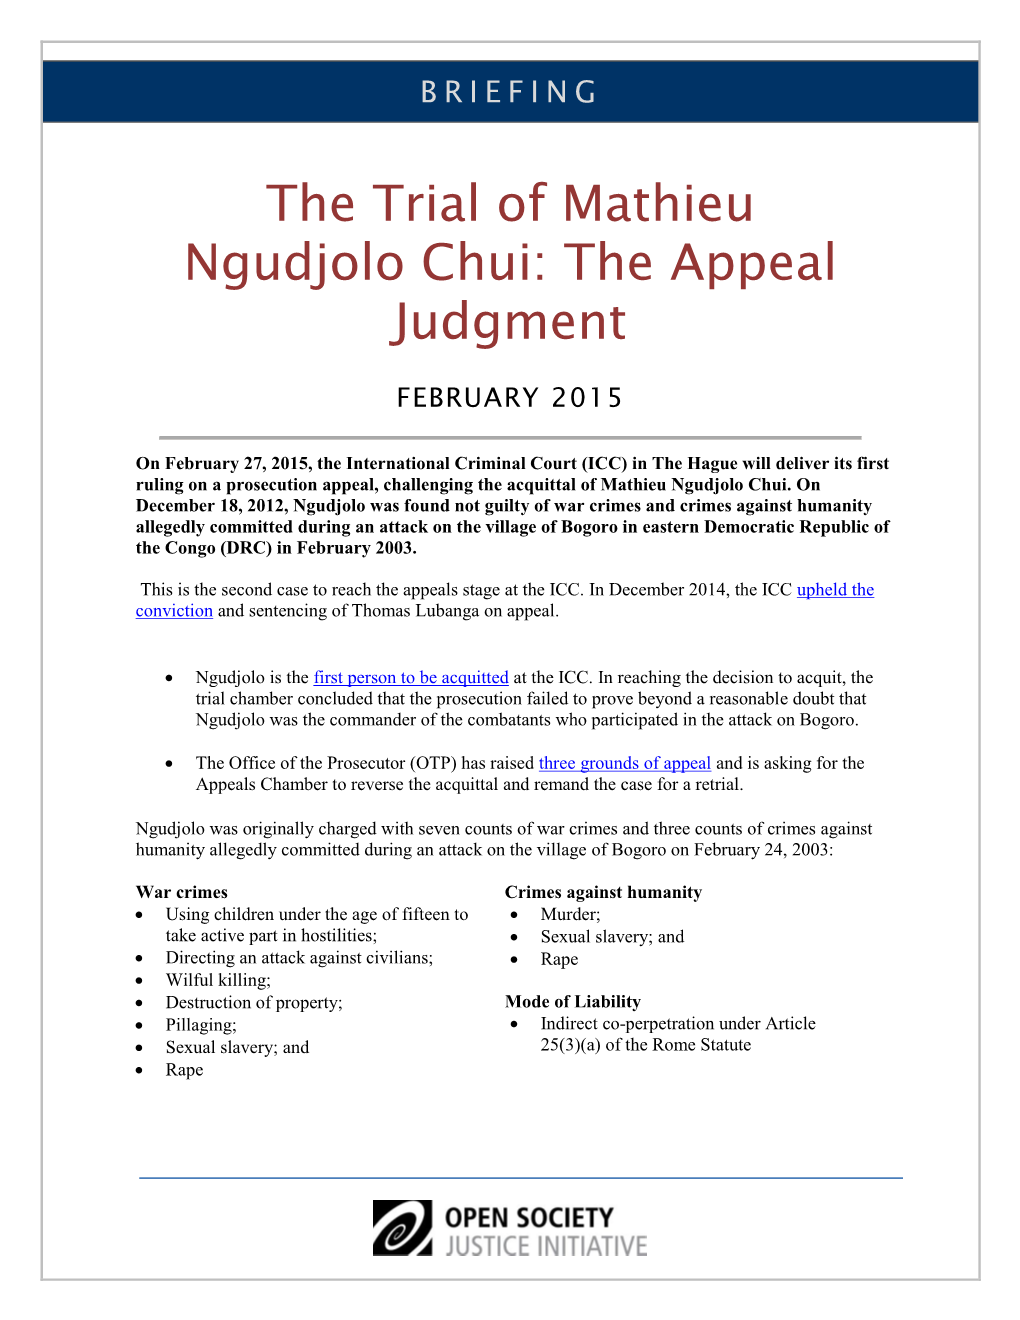 The Trial of Mathieu Ngudjolo Chui: the Appeal Judgment